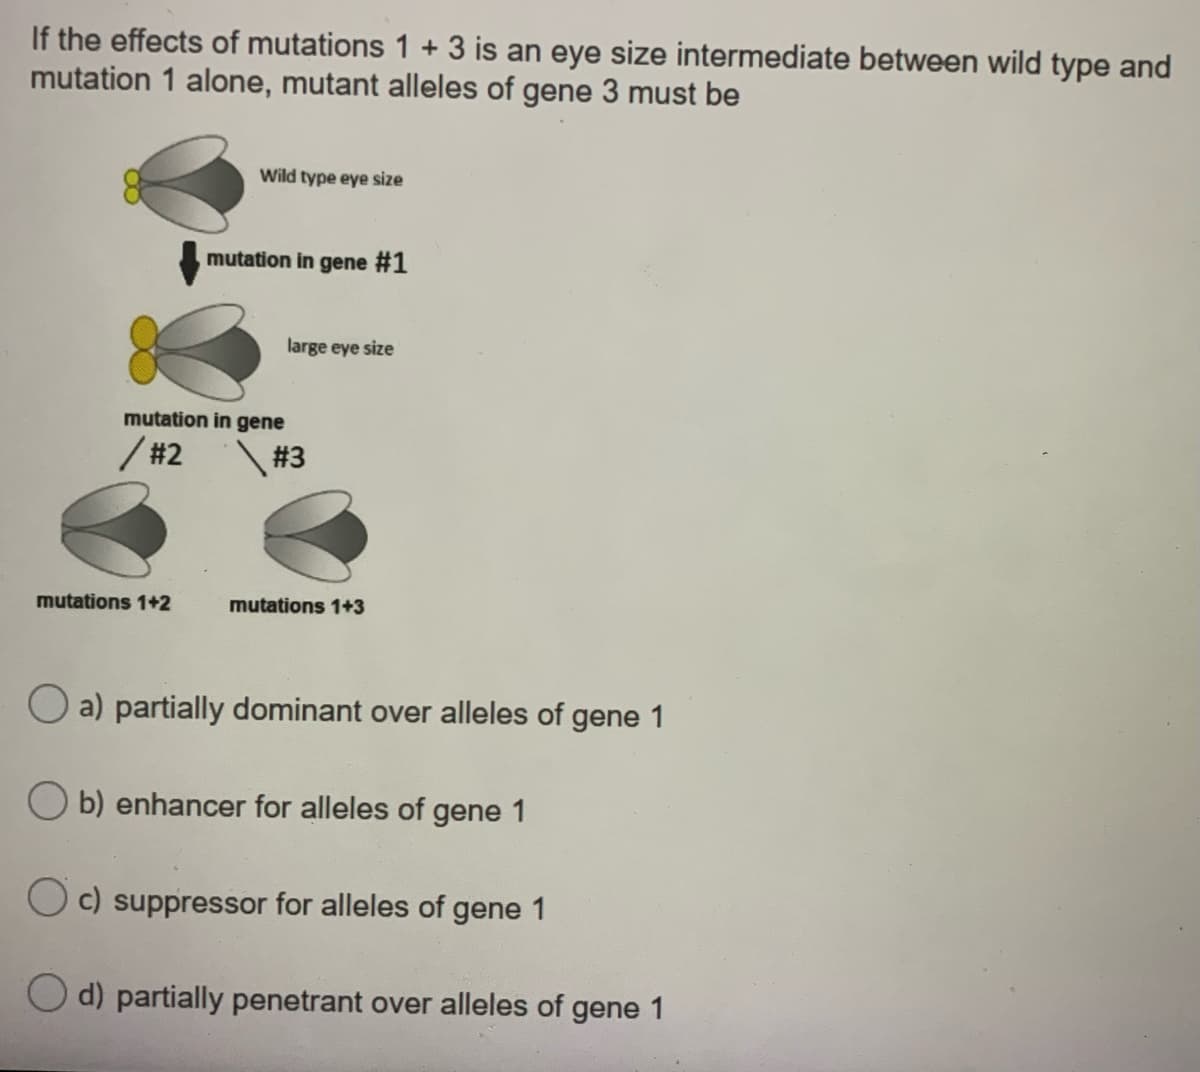 If the effects of mutations 1 + 3 is an eye size intermediate between wild type and
mutation 1 alone, mutant alleles of gene 3 must be
Wild type eye size
mutation in gene #1
large eye size
mutation in gene
/#2
# 3
mutations 1+2
mutations 1+3
O a) partially dominant over alleles of gene 1
O b) enhancer for alleles of gene 1
O c) suppressor for alleles of gene 1
d) partially penetrant over alleles of gene 1
